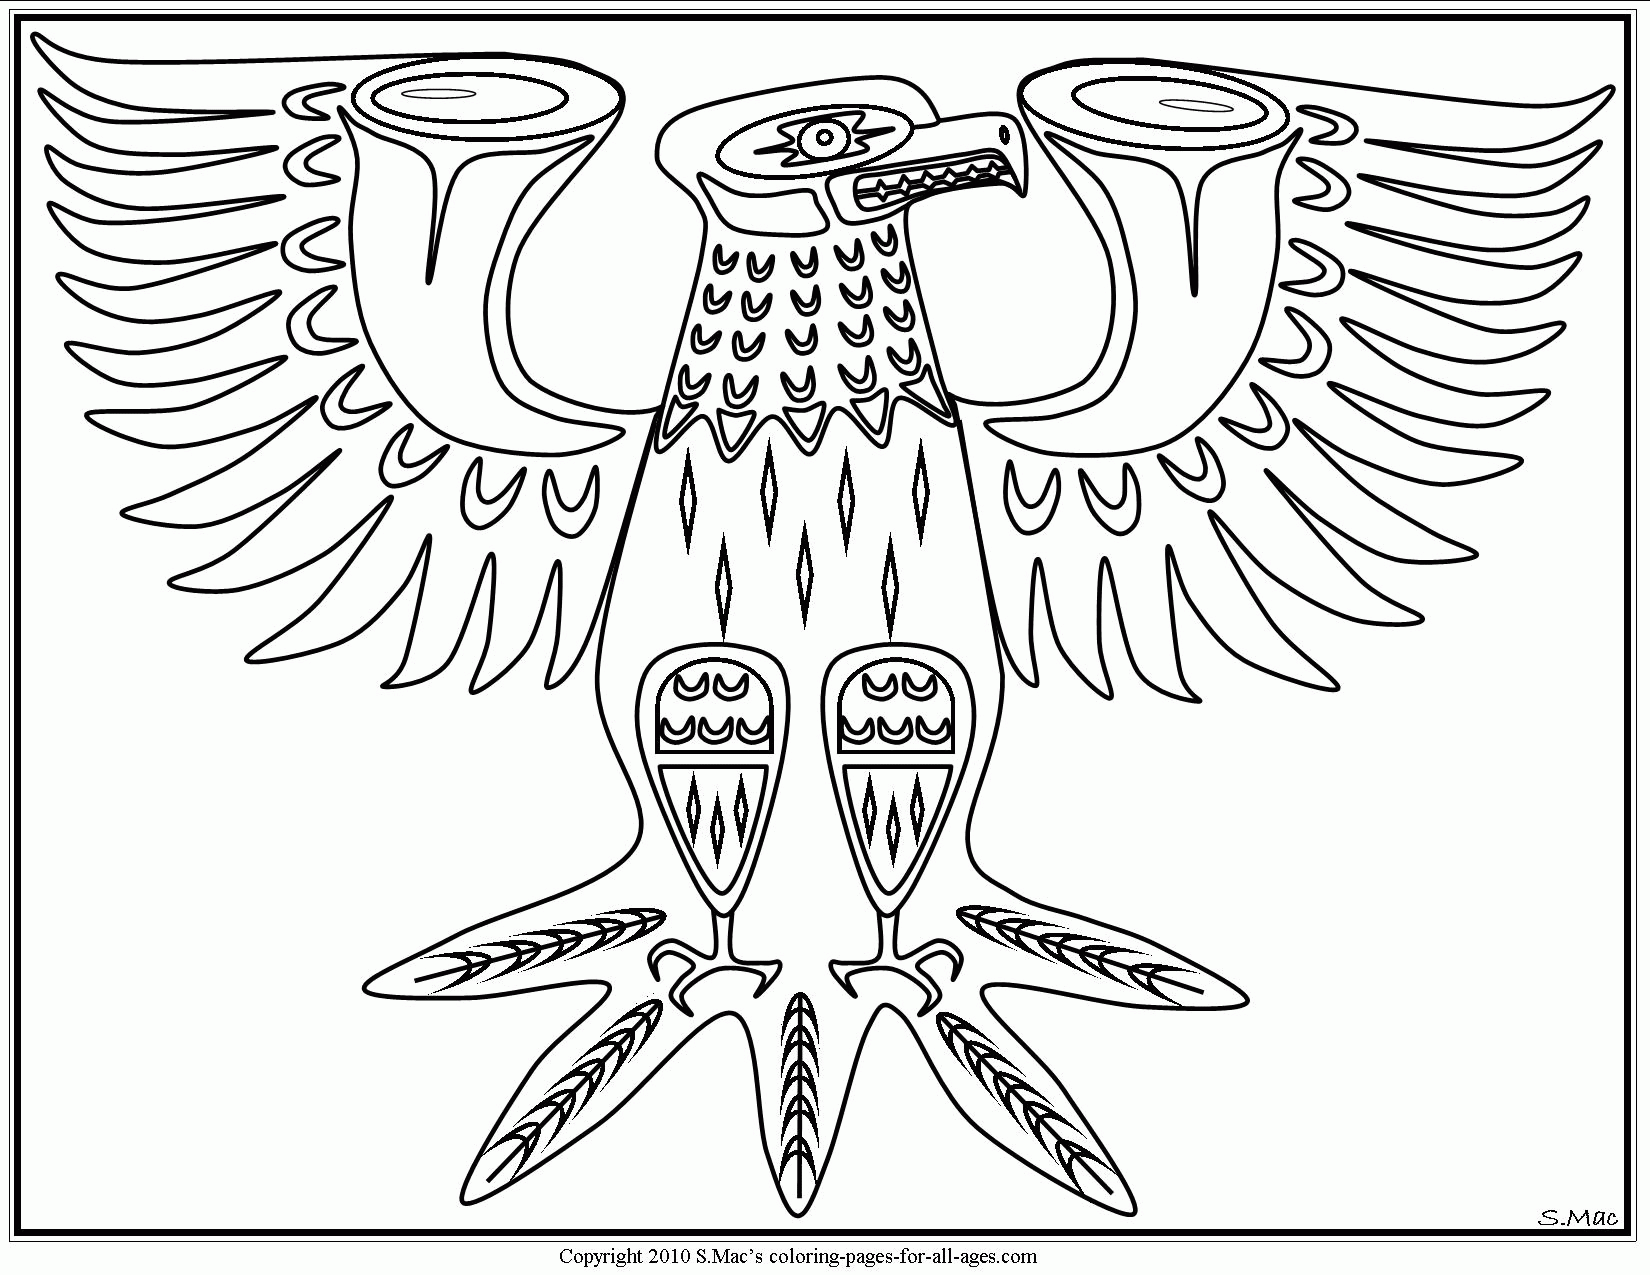 Coloring Page, Native Americans - Coloring Home